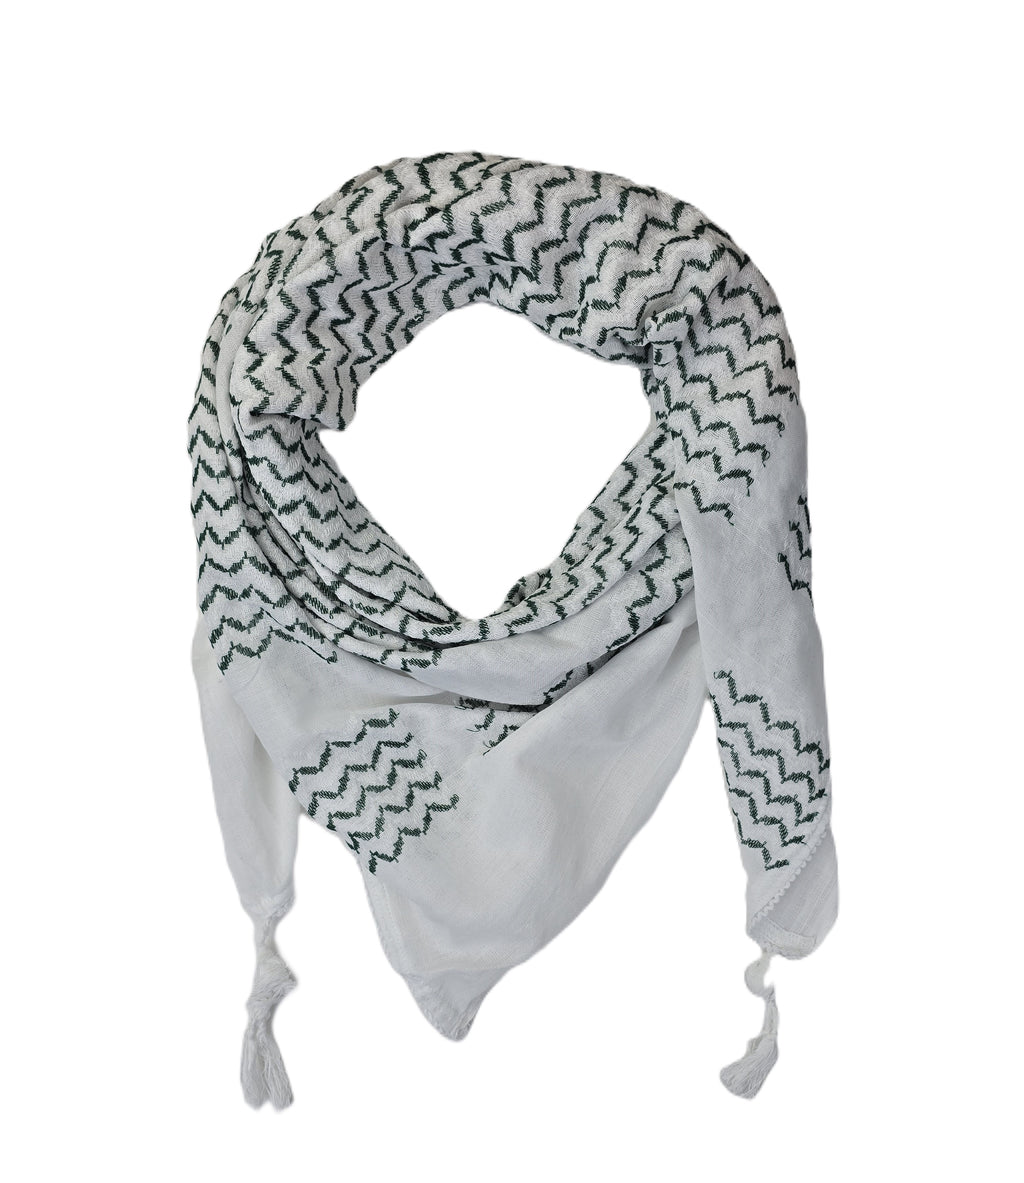 Keffiyeh Scarf Made in Palestine -  White with Green